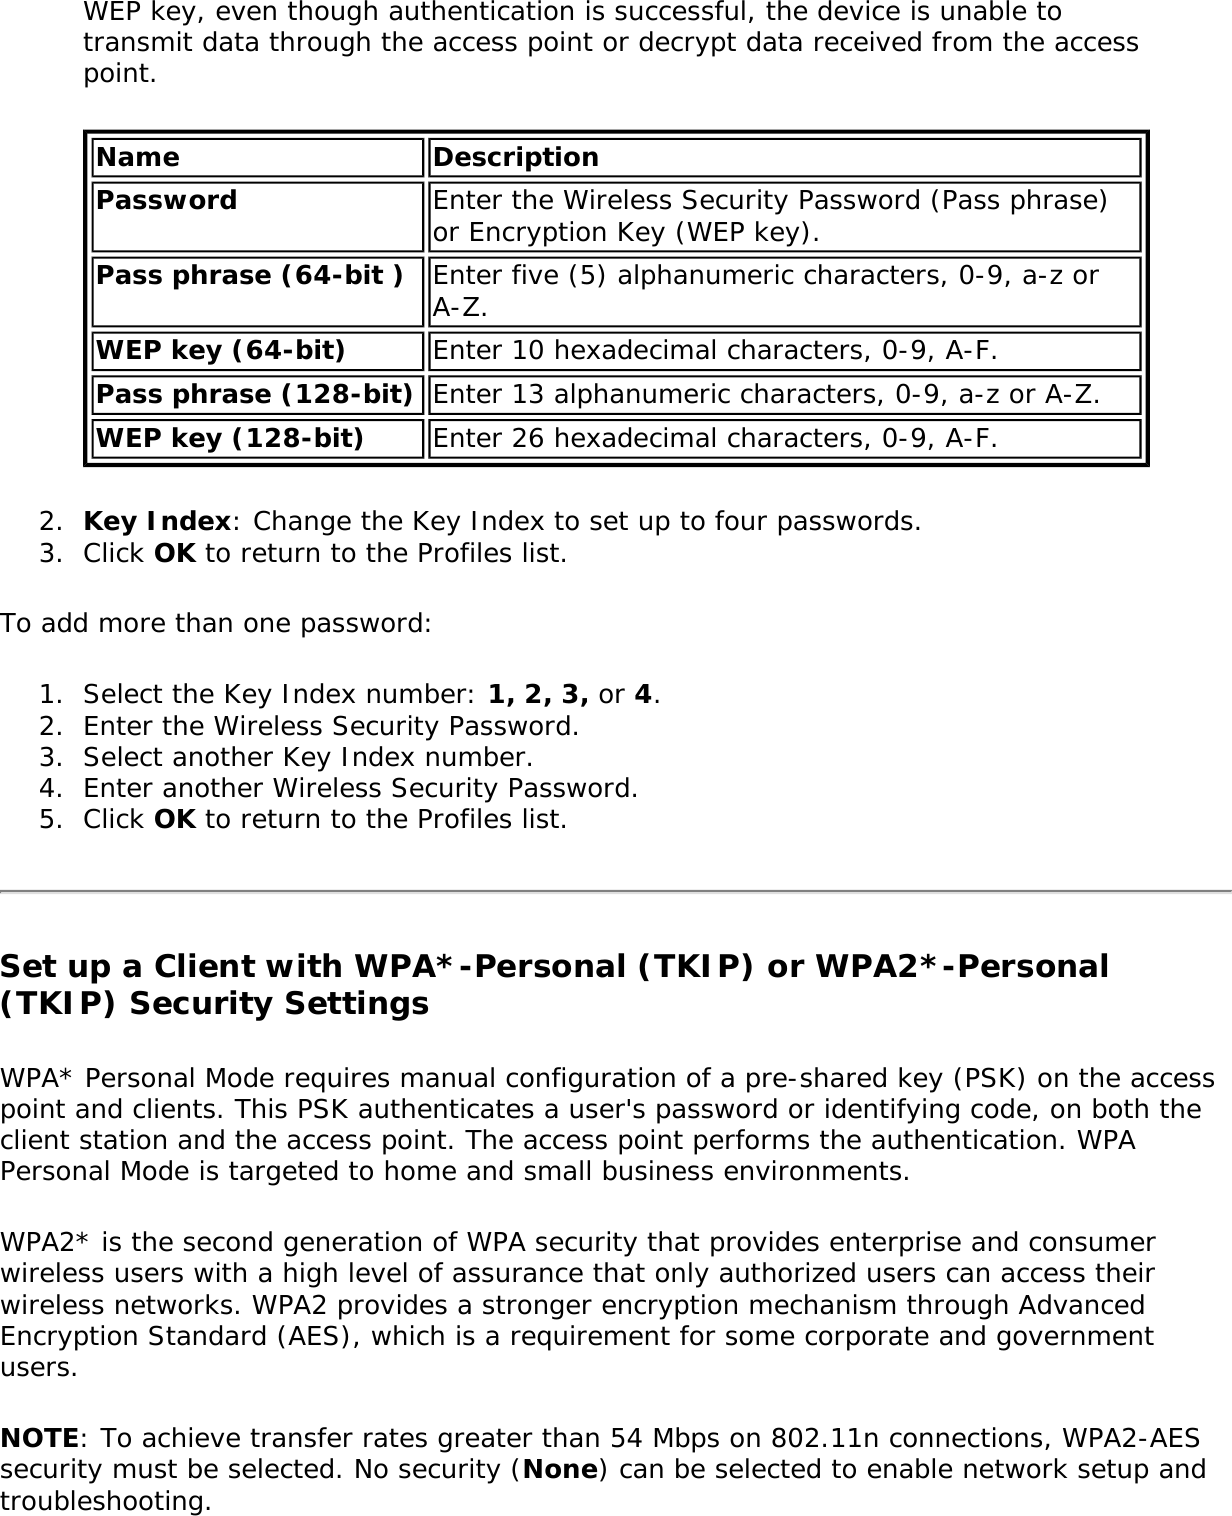 WEP key, even though authentication is successful, the device is unable to transmit data through the access point or decrypt data received from the access point.Name DescriptionPassword Enter the Wireless Security Password (Pass phrase) or Encryption Key (WEP key). Pass phrase (64-bit ) Enter five (5) alphanumeric characters, 0-9, a-z or A-Z. WEP key (64-bit) Enter 10 hexadecimal characters, 0-9, A-F.Pass phrase (128-bit) Enter 13 alphanumeric characters, 0-9, a-z or A-Z. WEP key (128-bit) Enter 26 hexadecimal characters, 0-9, A-F.2.  Key Index: Change the Key Index to set up to four passwords. 3.  Click OK to return to the Profiles list.To add more than one password: 1.  Select the Key Index number: 1, 2, 3, or 4.2.  Enter the Wireless Security Password.3.  Select another Key Index number.4.  Enter another Wireless Security Password.5.  Click OK to return to the Profiles list.Set up a Client with WPA*-Personal (TKIP) or WPA2*-Personal (TKIP) Security SettingsWPA* Personal Mode requires manual configuration of a pre-shared key (PSK) on the access point and clients. This PSK authenticates a user&apos;s password or identifying code, on both the client station and the access point. The access point performs the authentication. WPA Personal Mode is targeted to home and small business environments. WPA2* is the second generation of WPA security that provides enterprise and consumer wireless users with a high level of assurance that only authorized users can access their wireless networks. WPA2 provides a stronger encryption mechanism through Advanced Encryption Standard (AES), which is a requirement for some corporate and government users.NOTE: To achieve transfer rates greater than 54 Mbps on 802.11n connections, WPA2-AES security must be selected. No security (None) can be selected to enable network setup and troubleshooting.